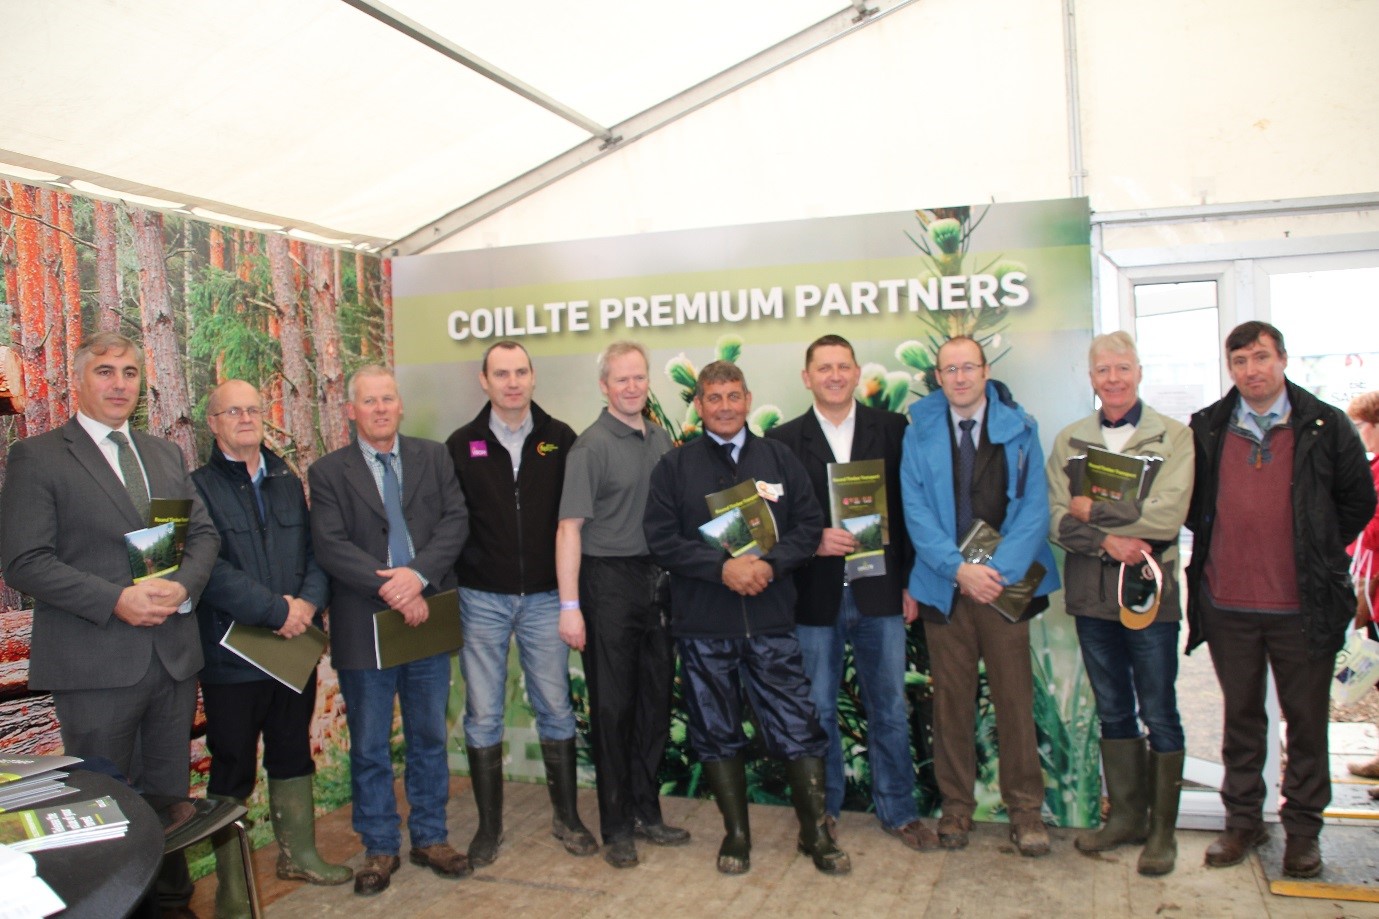 Launch of Coillte Drivers Guide Ploughing Championships 2017